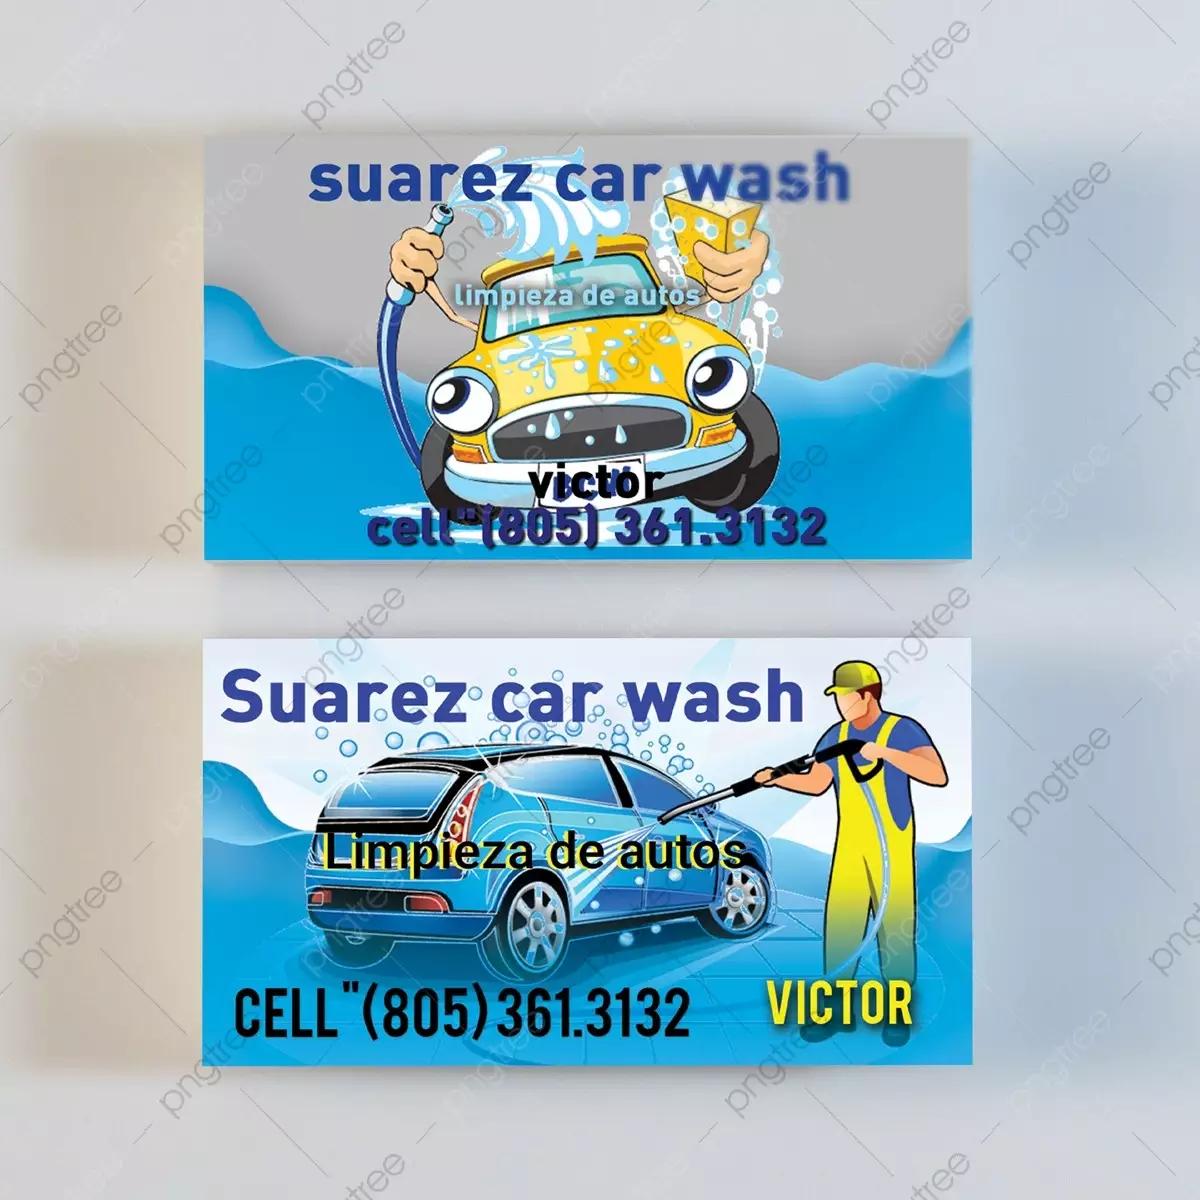 Car Wash Business Card Template Download on Pngtree